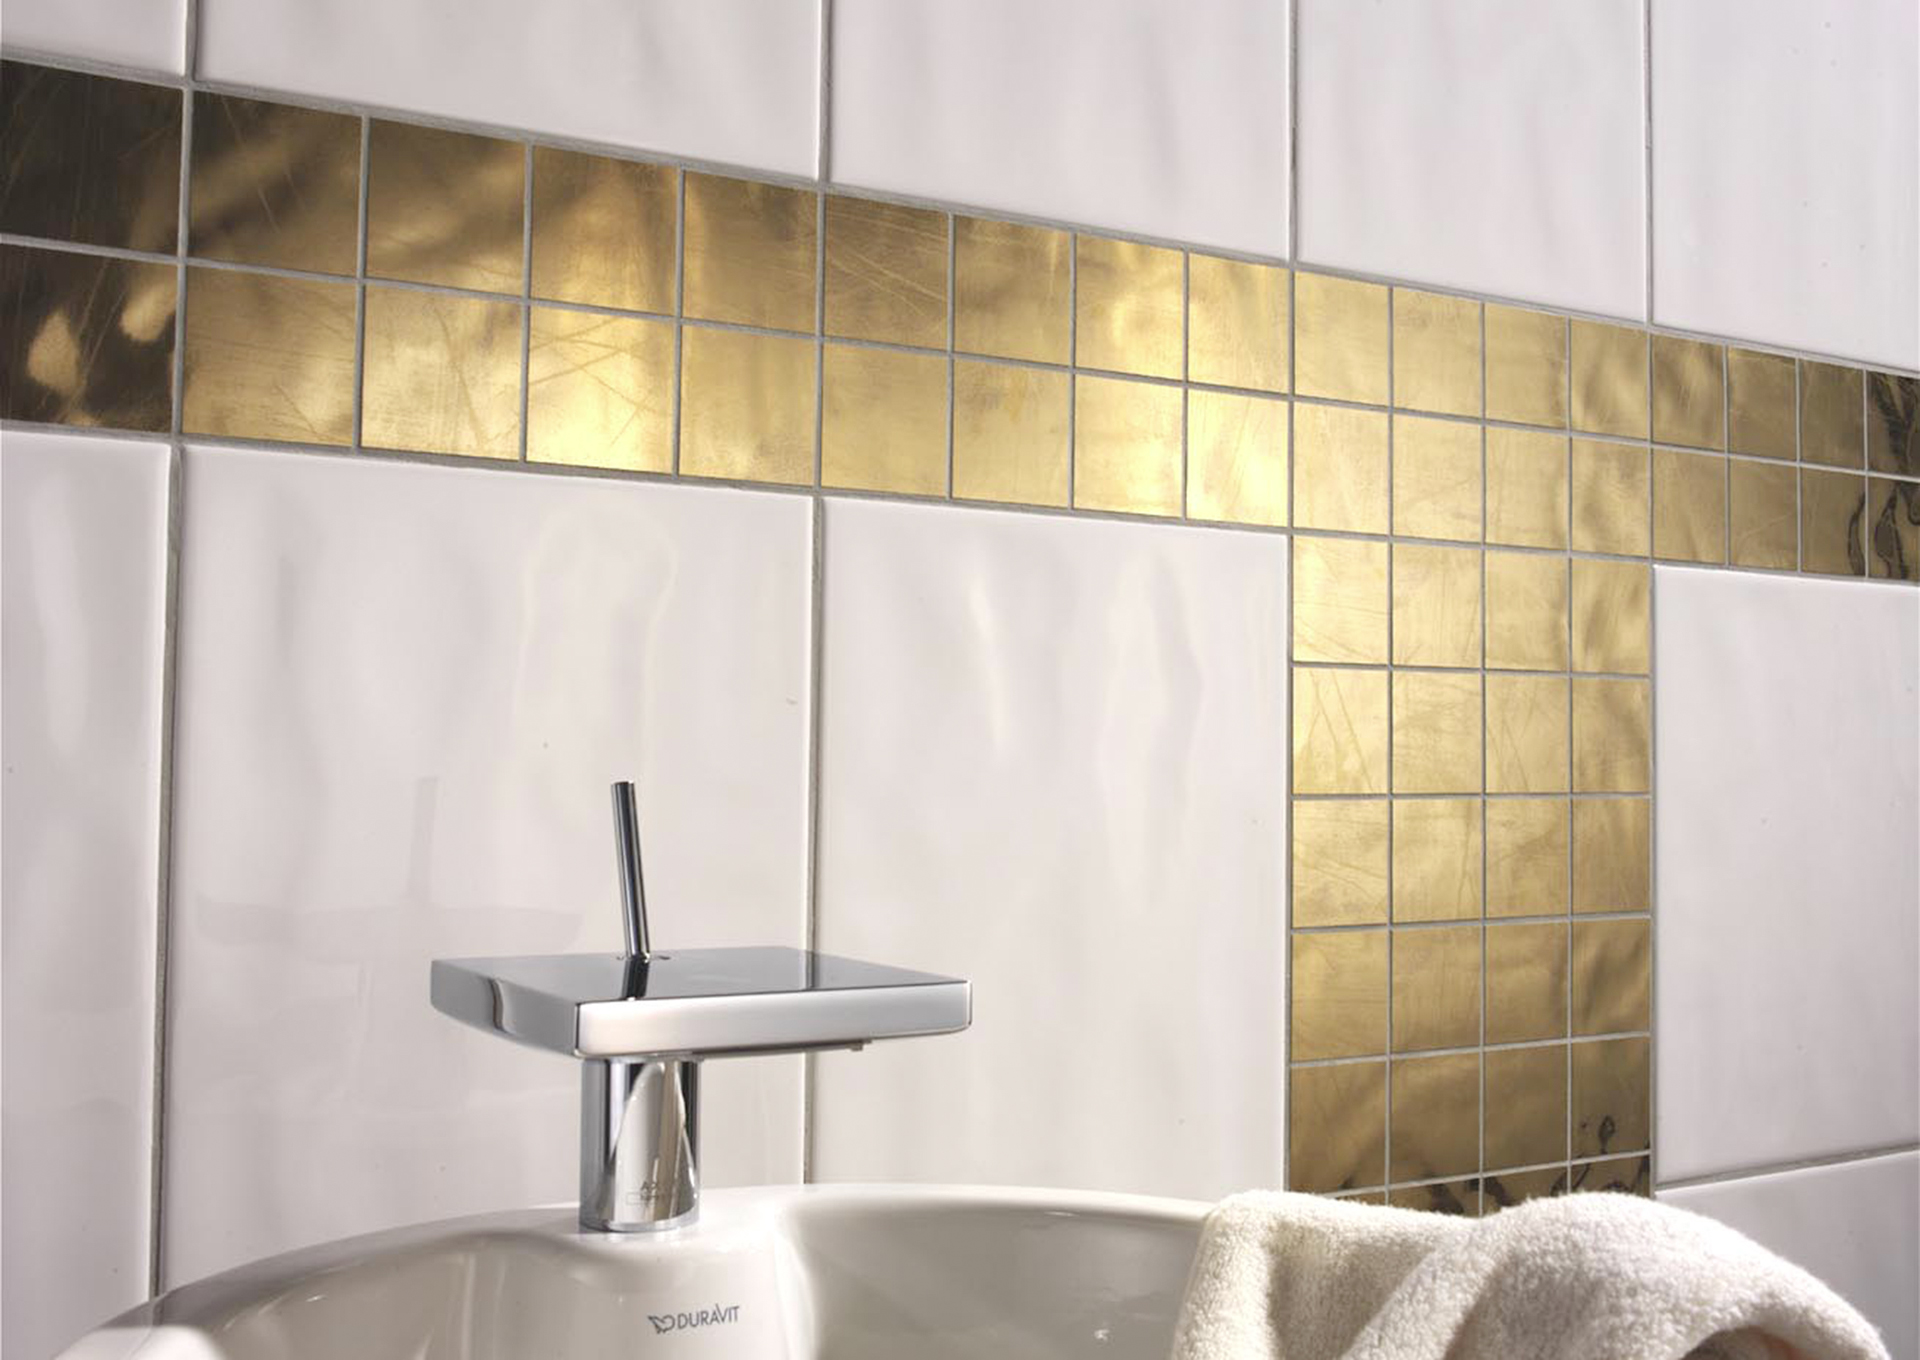 Gold Tiles realgold 7.2x7.2 Steingut, 7mm